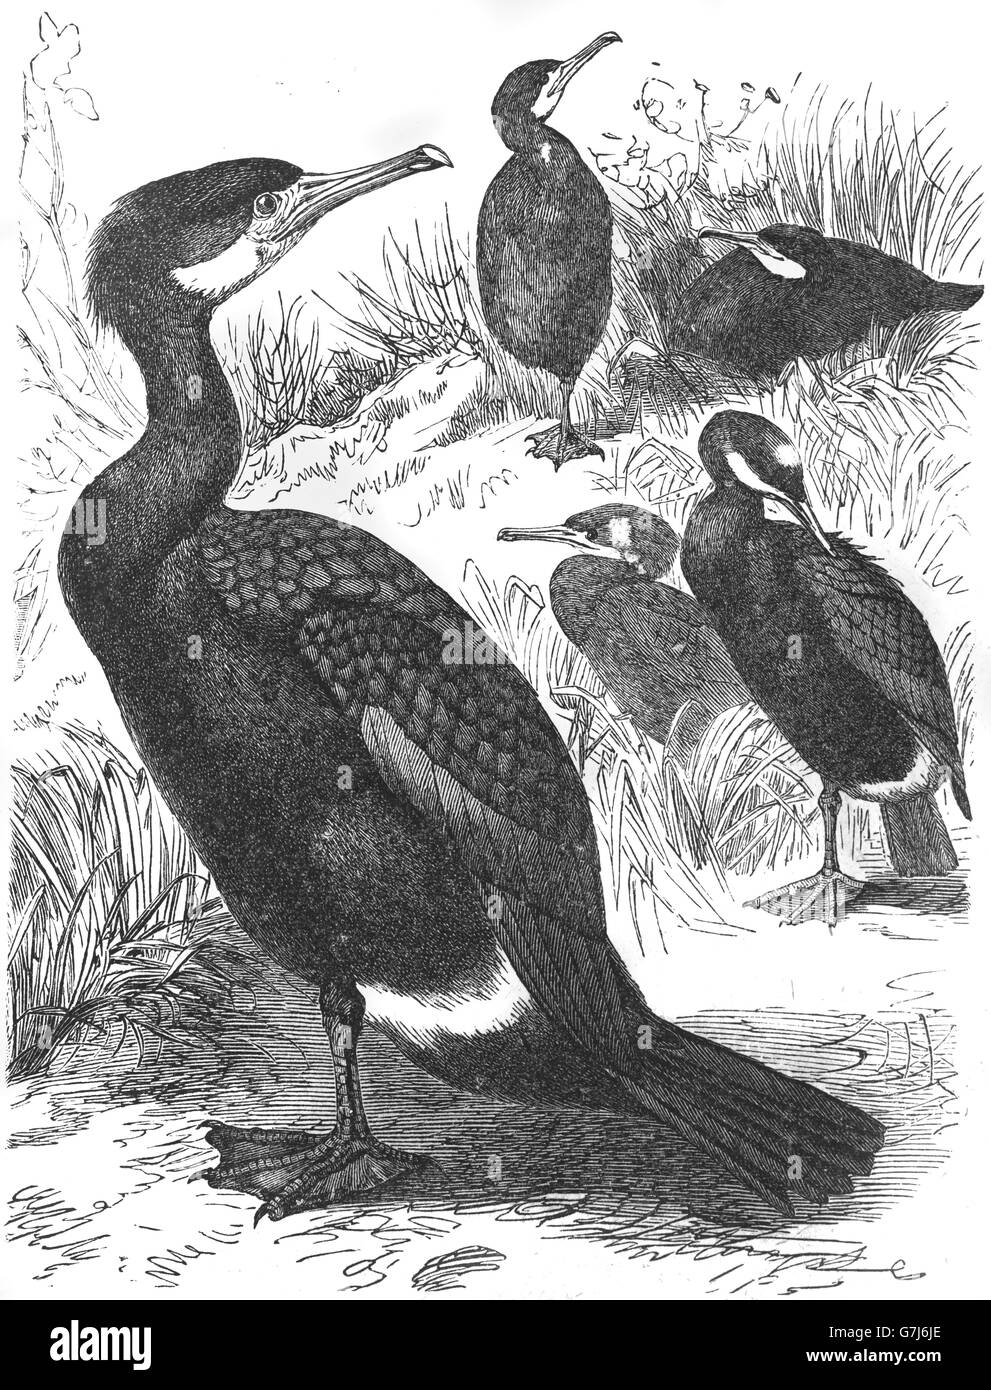 Great cormorant, Phalacrocorax carbo, illustration from book dated 1904 Stock Photo